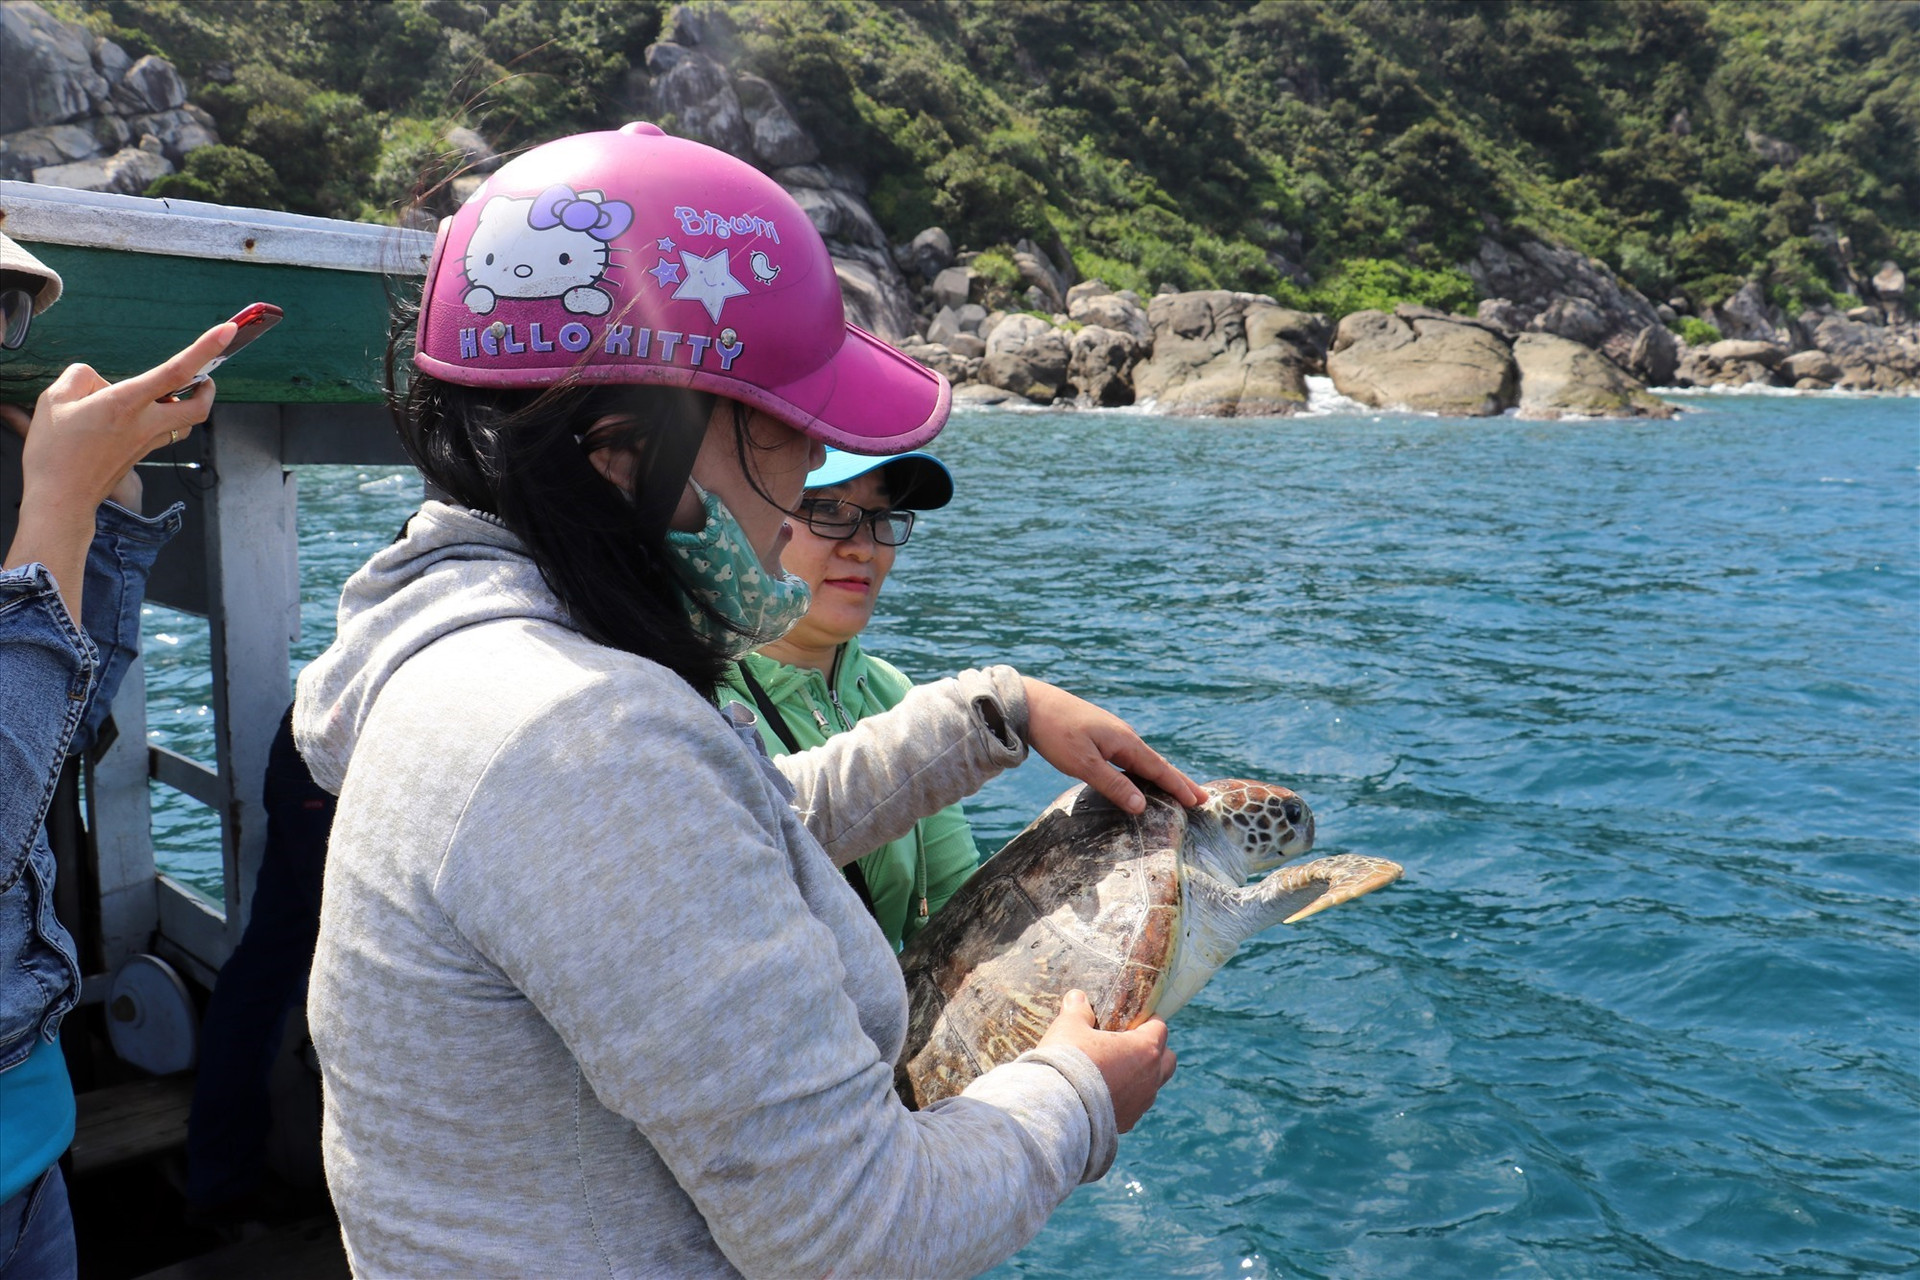 More and more sea turtles are released into the wild by the local people.